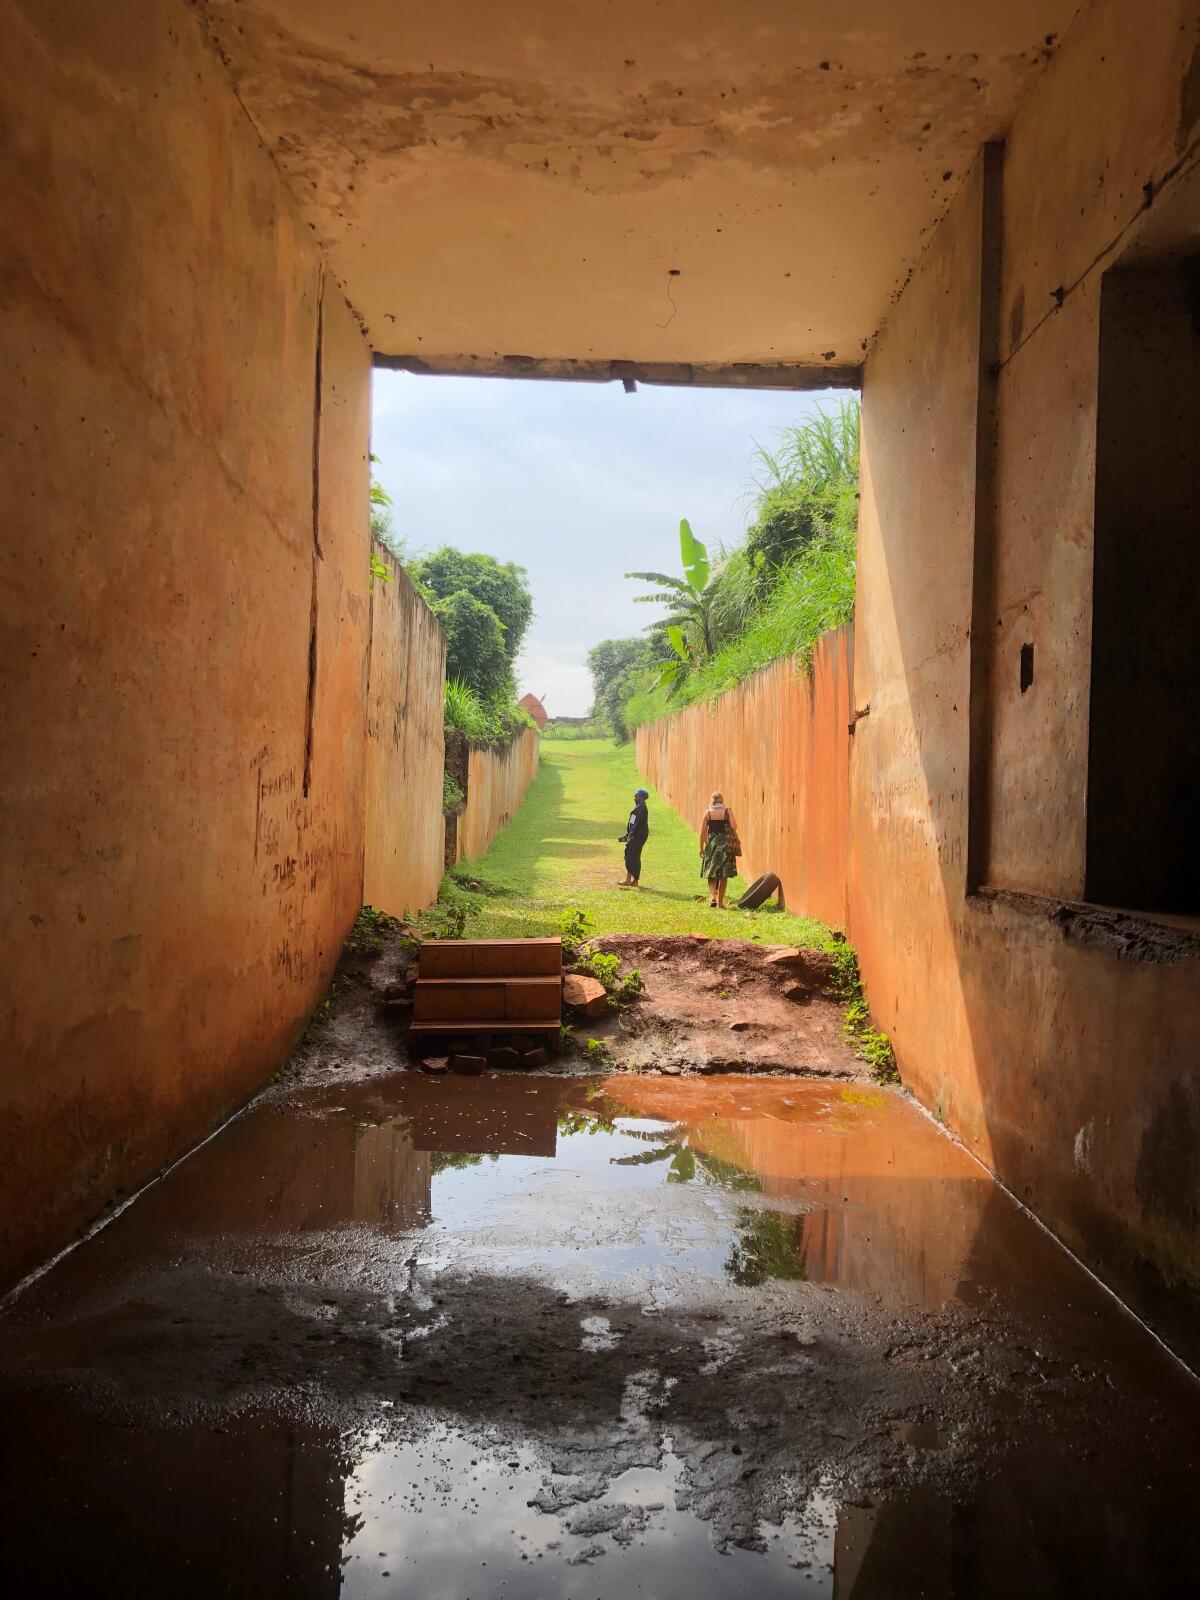 Shown is the view from inside Ugandan leader Idi Amin's bunker, a dark concrete lair used to torture political opponents, intellectuals, lawyers and religious leaders.